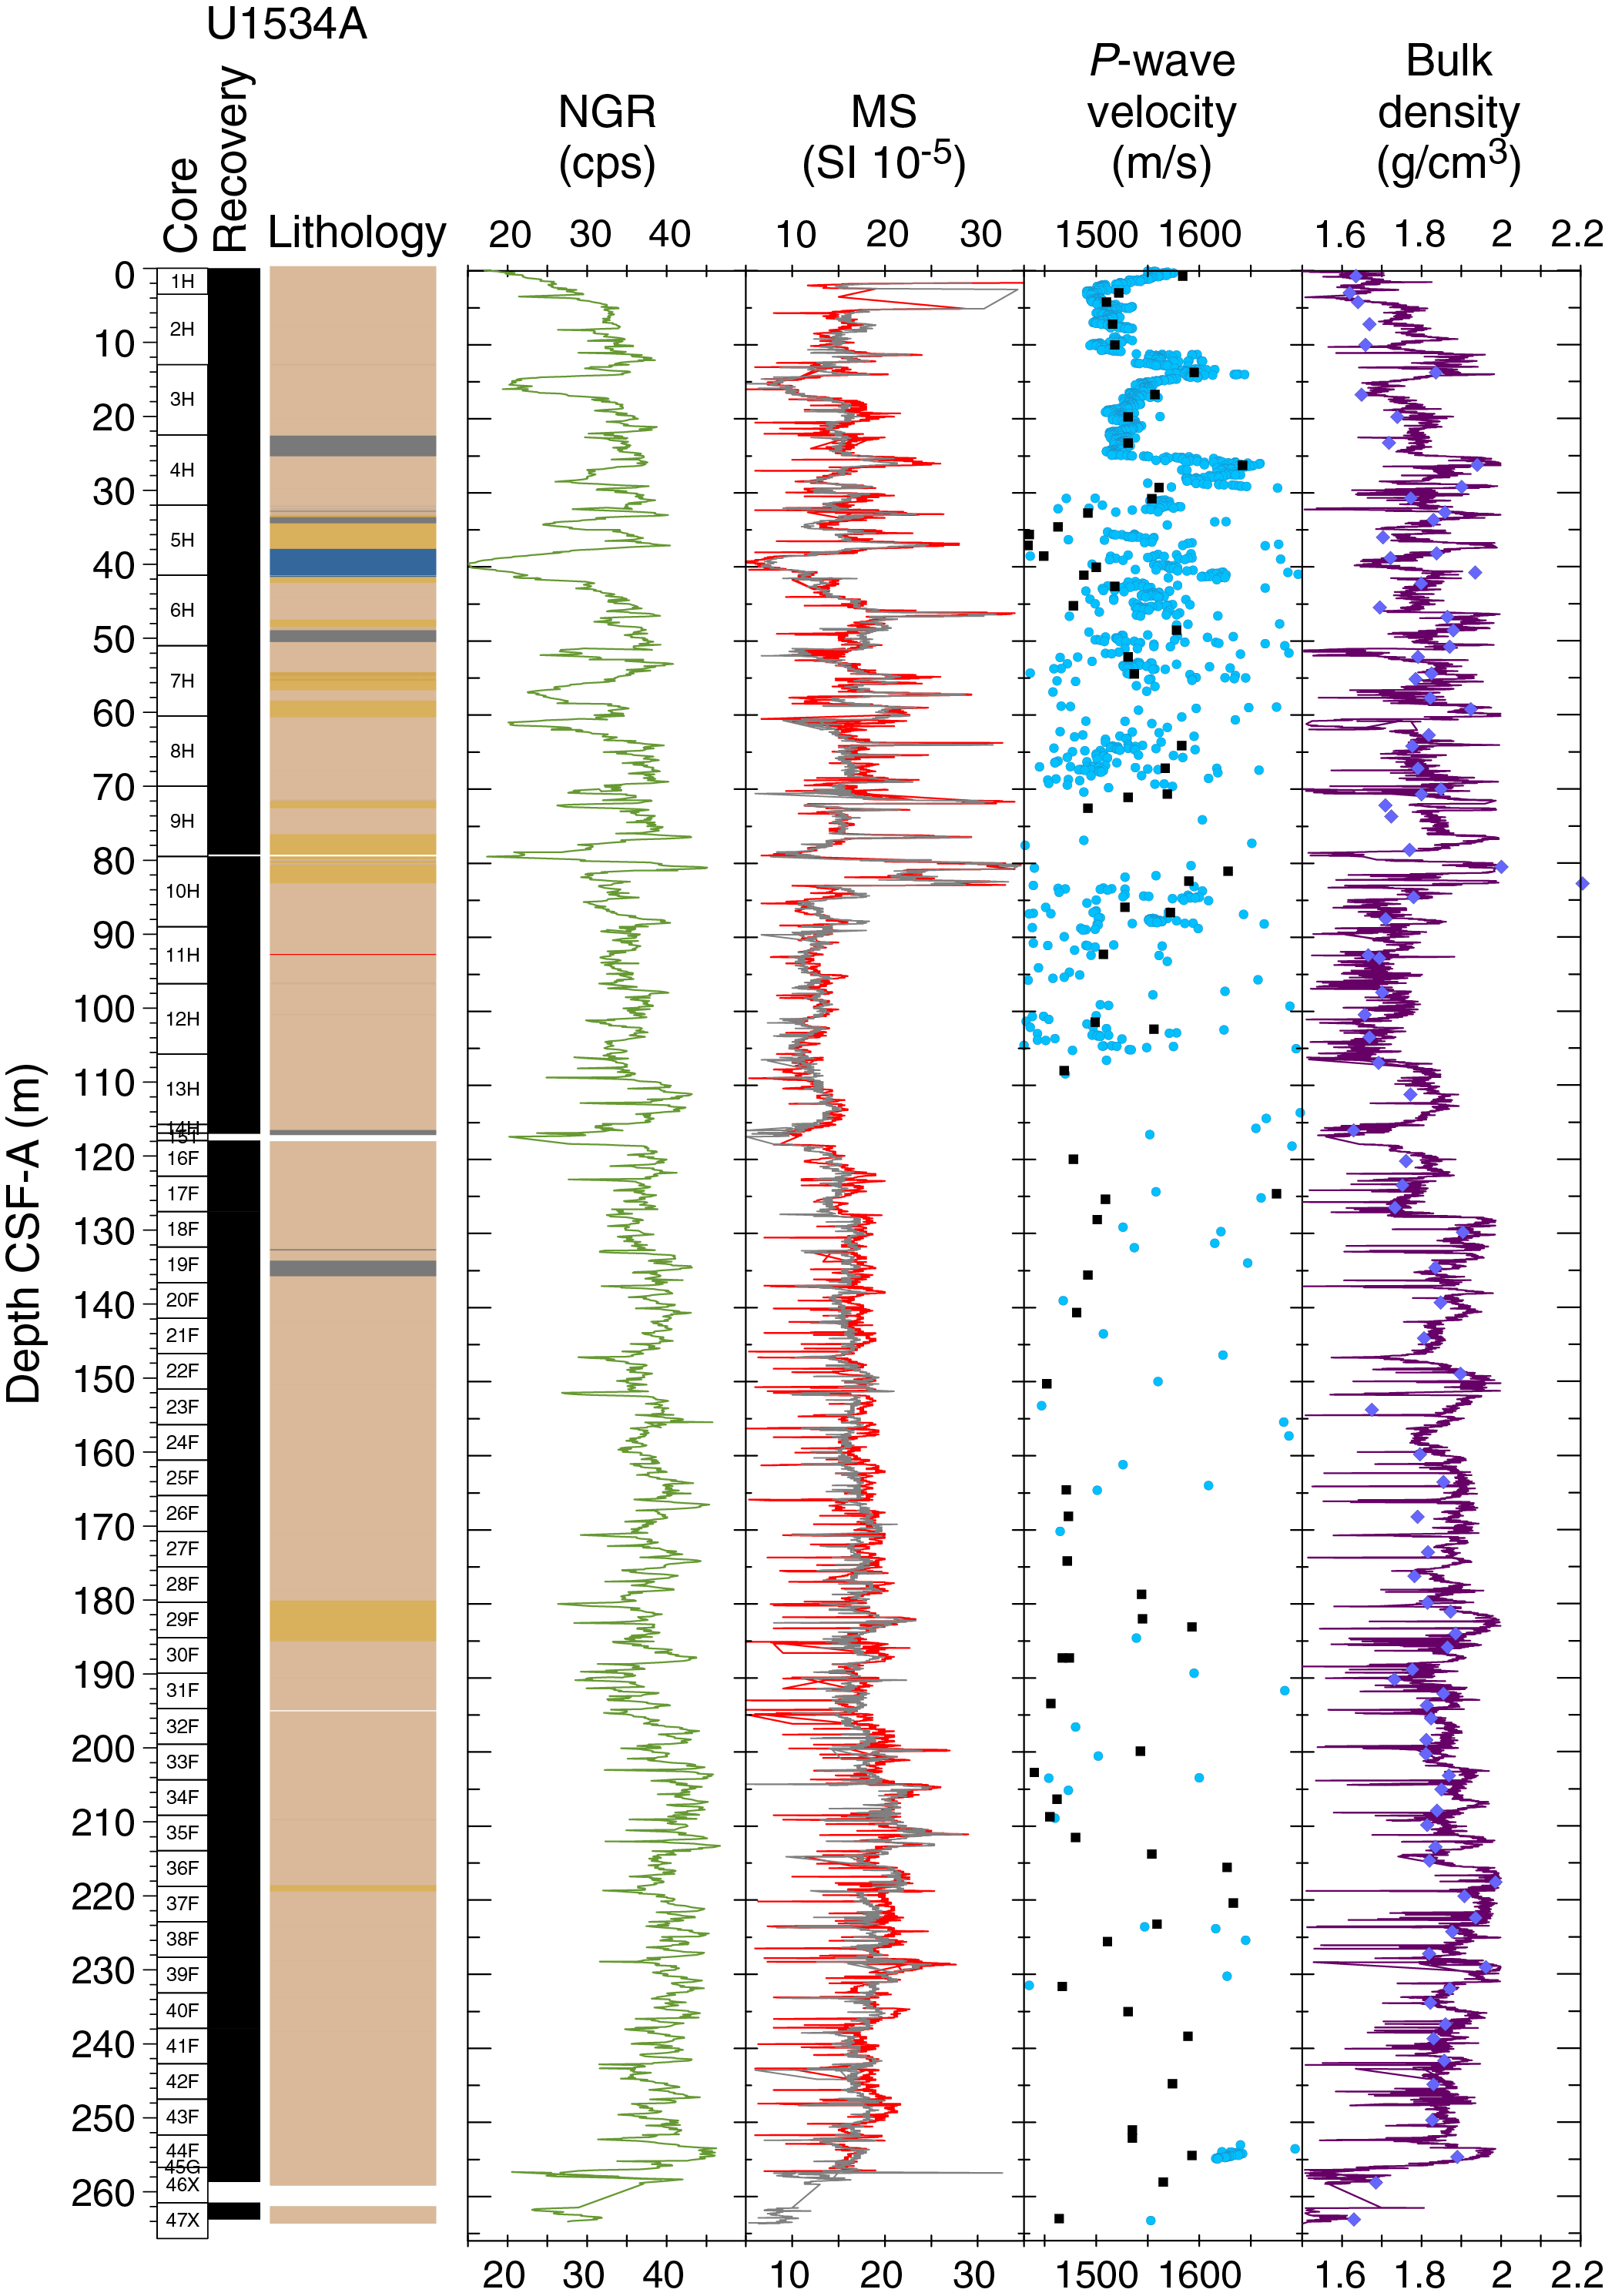 http://publications.iodp.org/proceedings/382/103/figures/382_103_F23.png